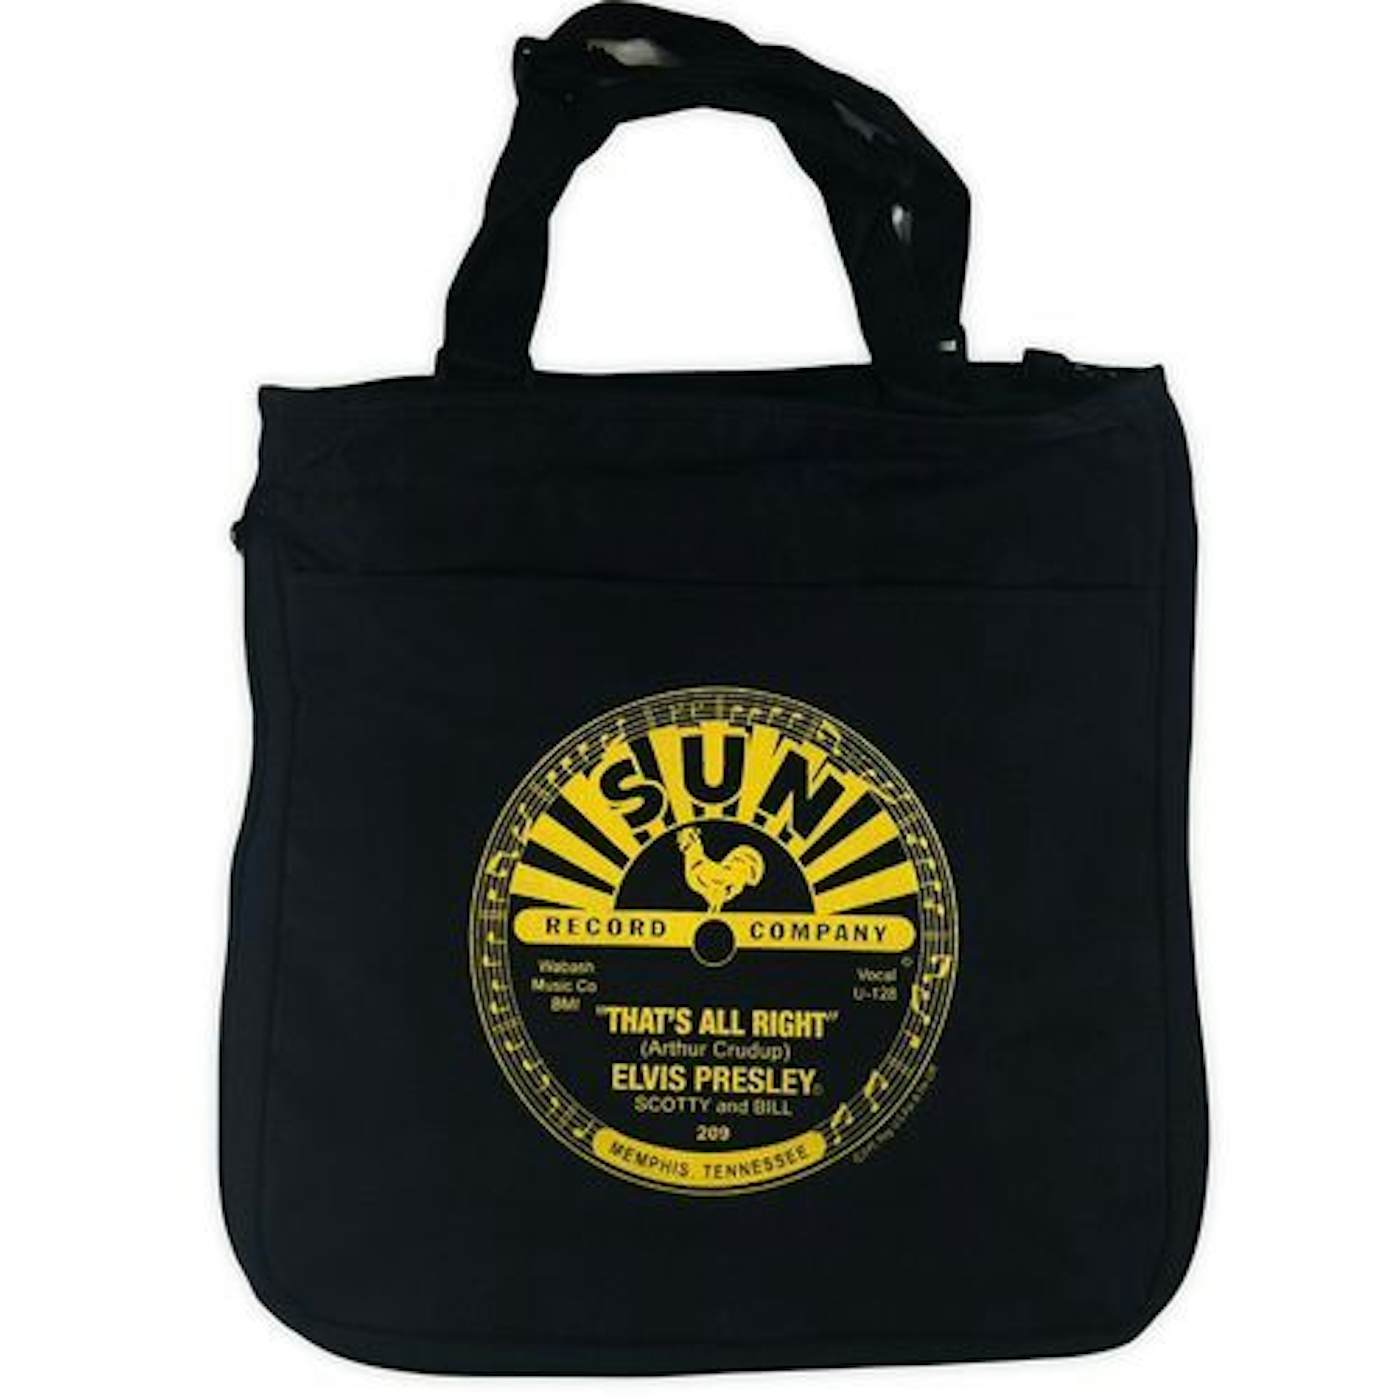 Jerry Lee Lewis Whole Lot of Shakin Tote Bag - Blue